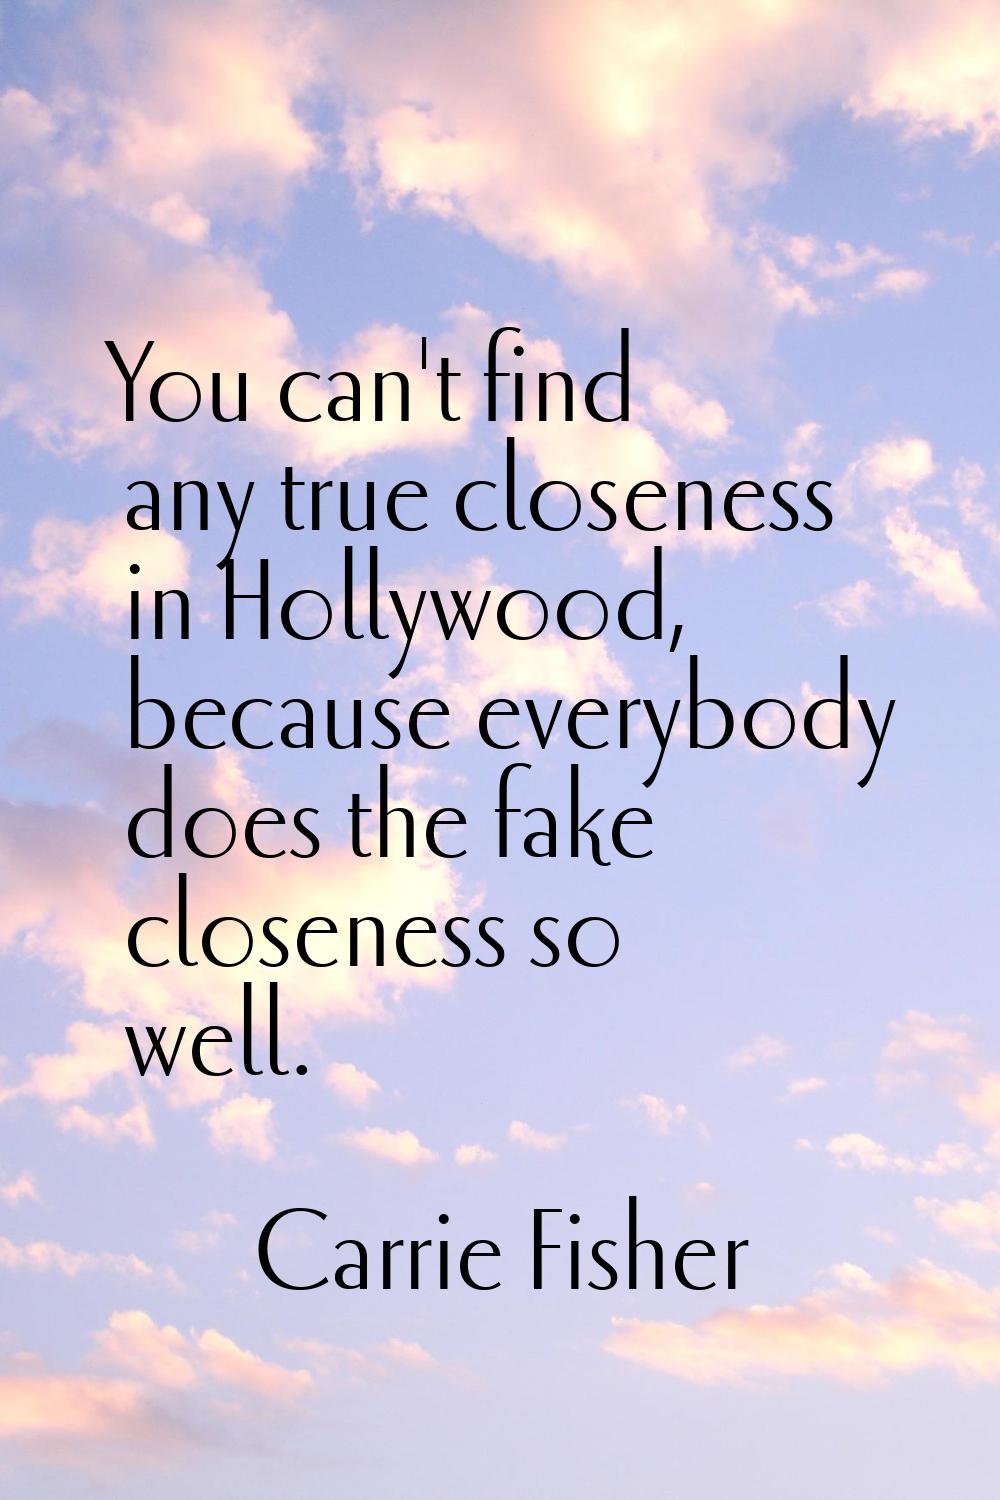 You can't find any true closeness in Hollywood, because everybody does the fake closeness so well.